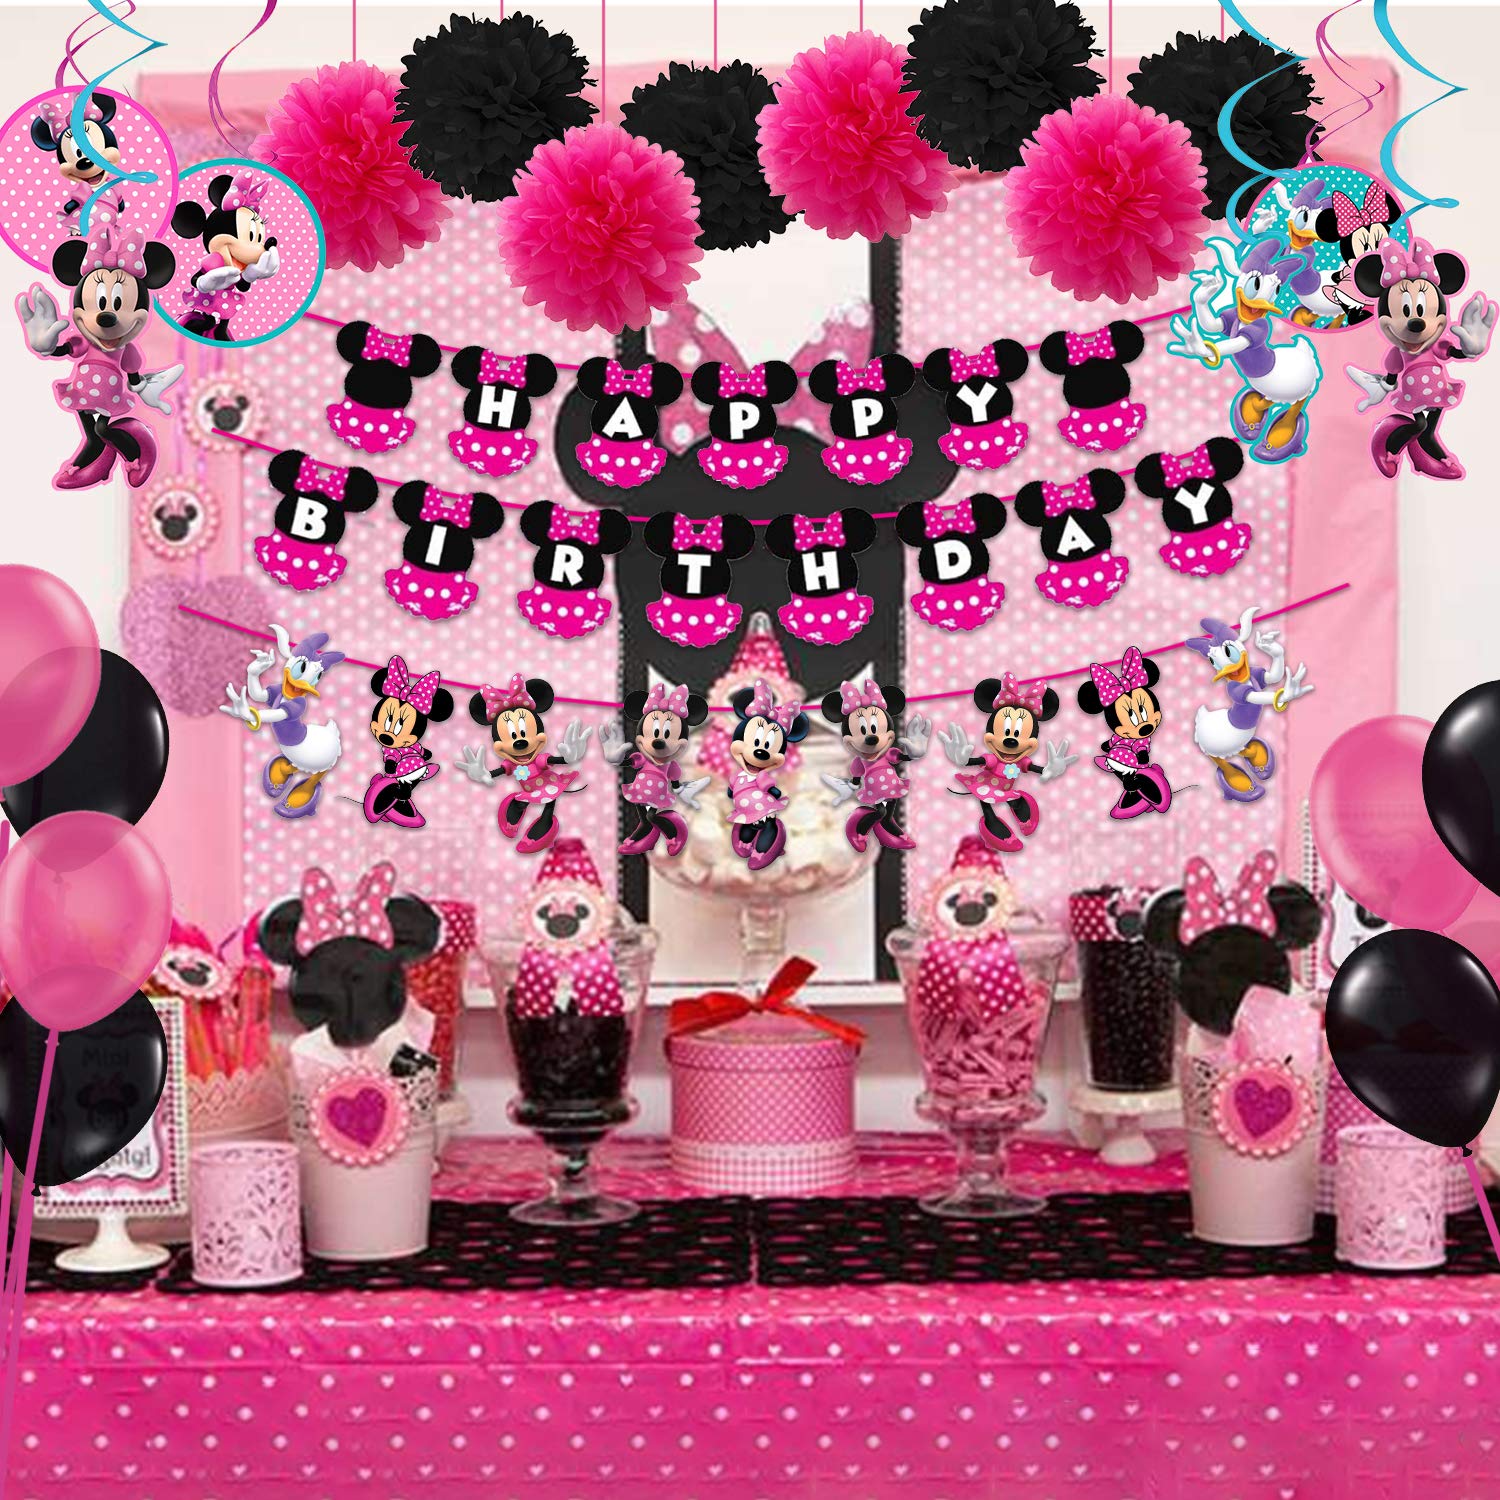 Top 15 Birthday Themes for Girls